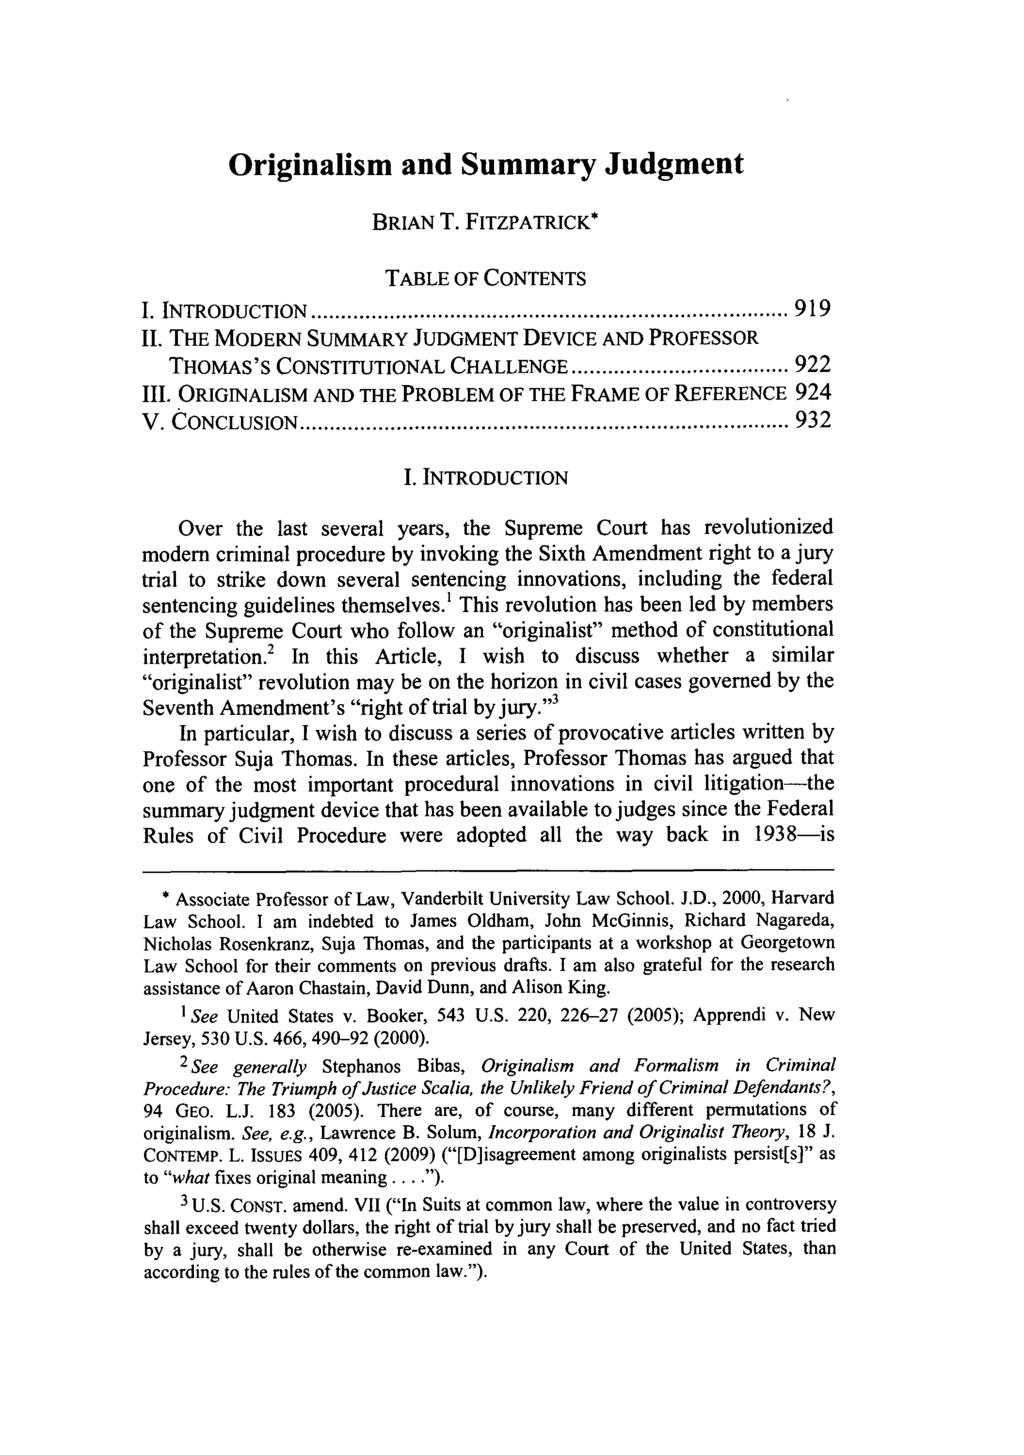 Originalism and Summary Judgment BRIAN T. FITZPATRICK* TABLE OF CONTENTS 1. INTRODUCTION... 919 11. THE MODERN SUMMARY JUDGMENT DEVICE AND PROFESSOR THOMAS'S CONSTITUTIONAL CHALLENGE... 922 111.